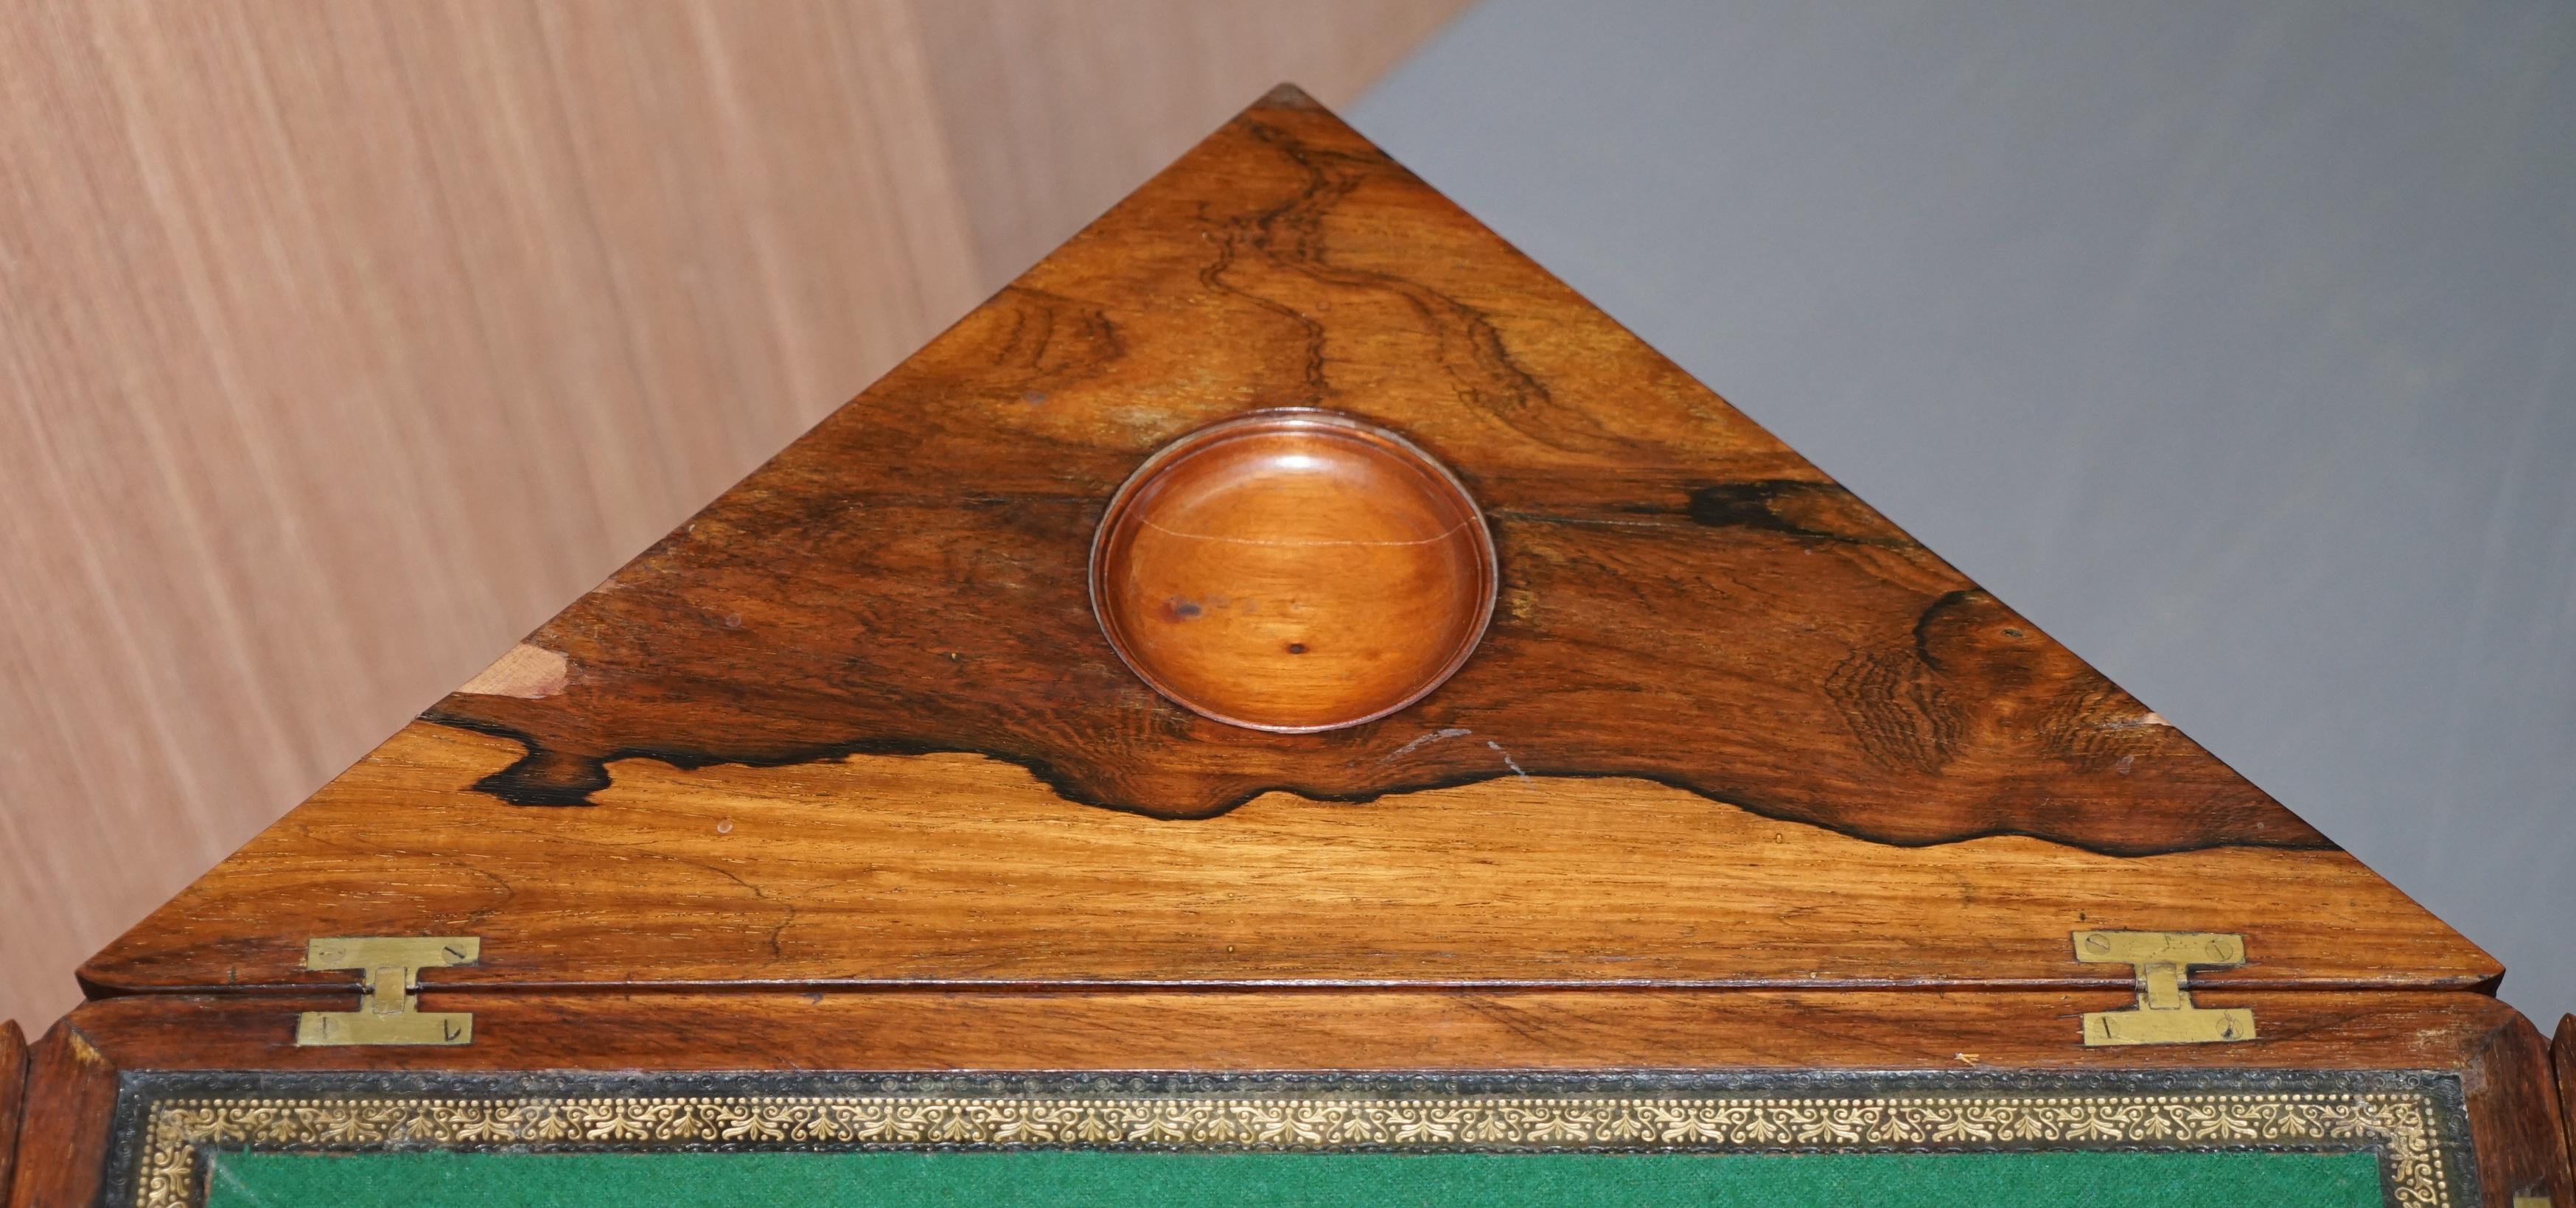 Victorian Mahogany Games Envelope Rare Wood Table circa 1880 Unfolds Extends 10